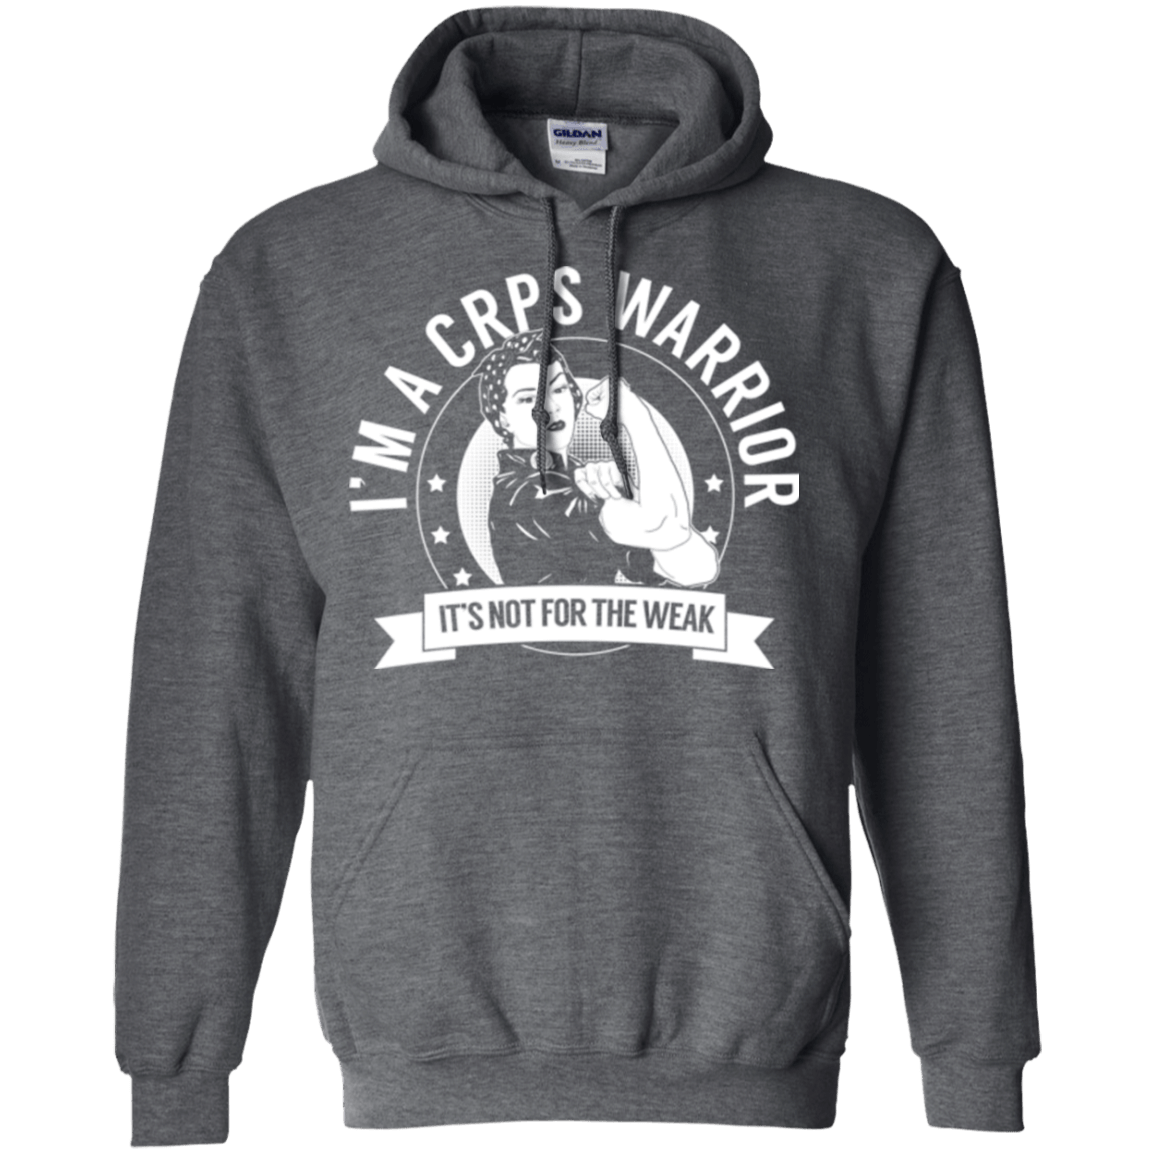 Complex Regional Pain Syndrome - CRPS Warrior Not For The Weak Pullover Hoodie 8 oz. - The Unchargeables